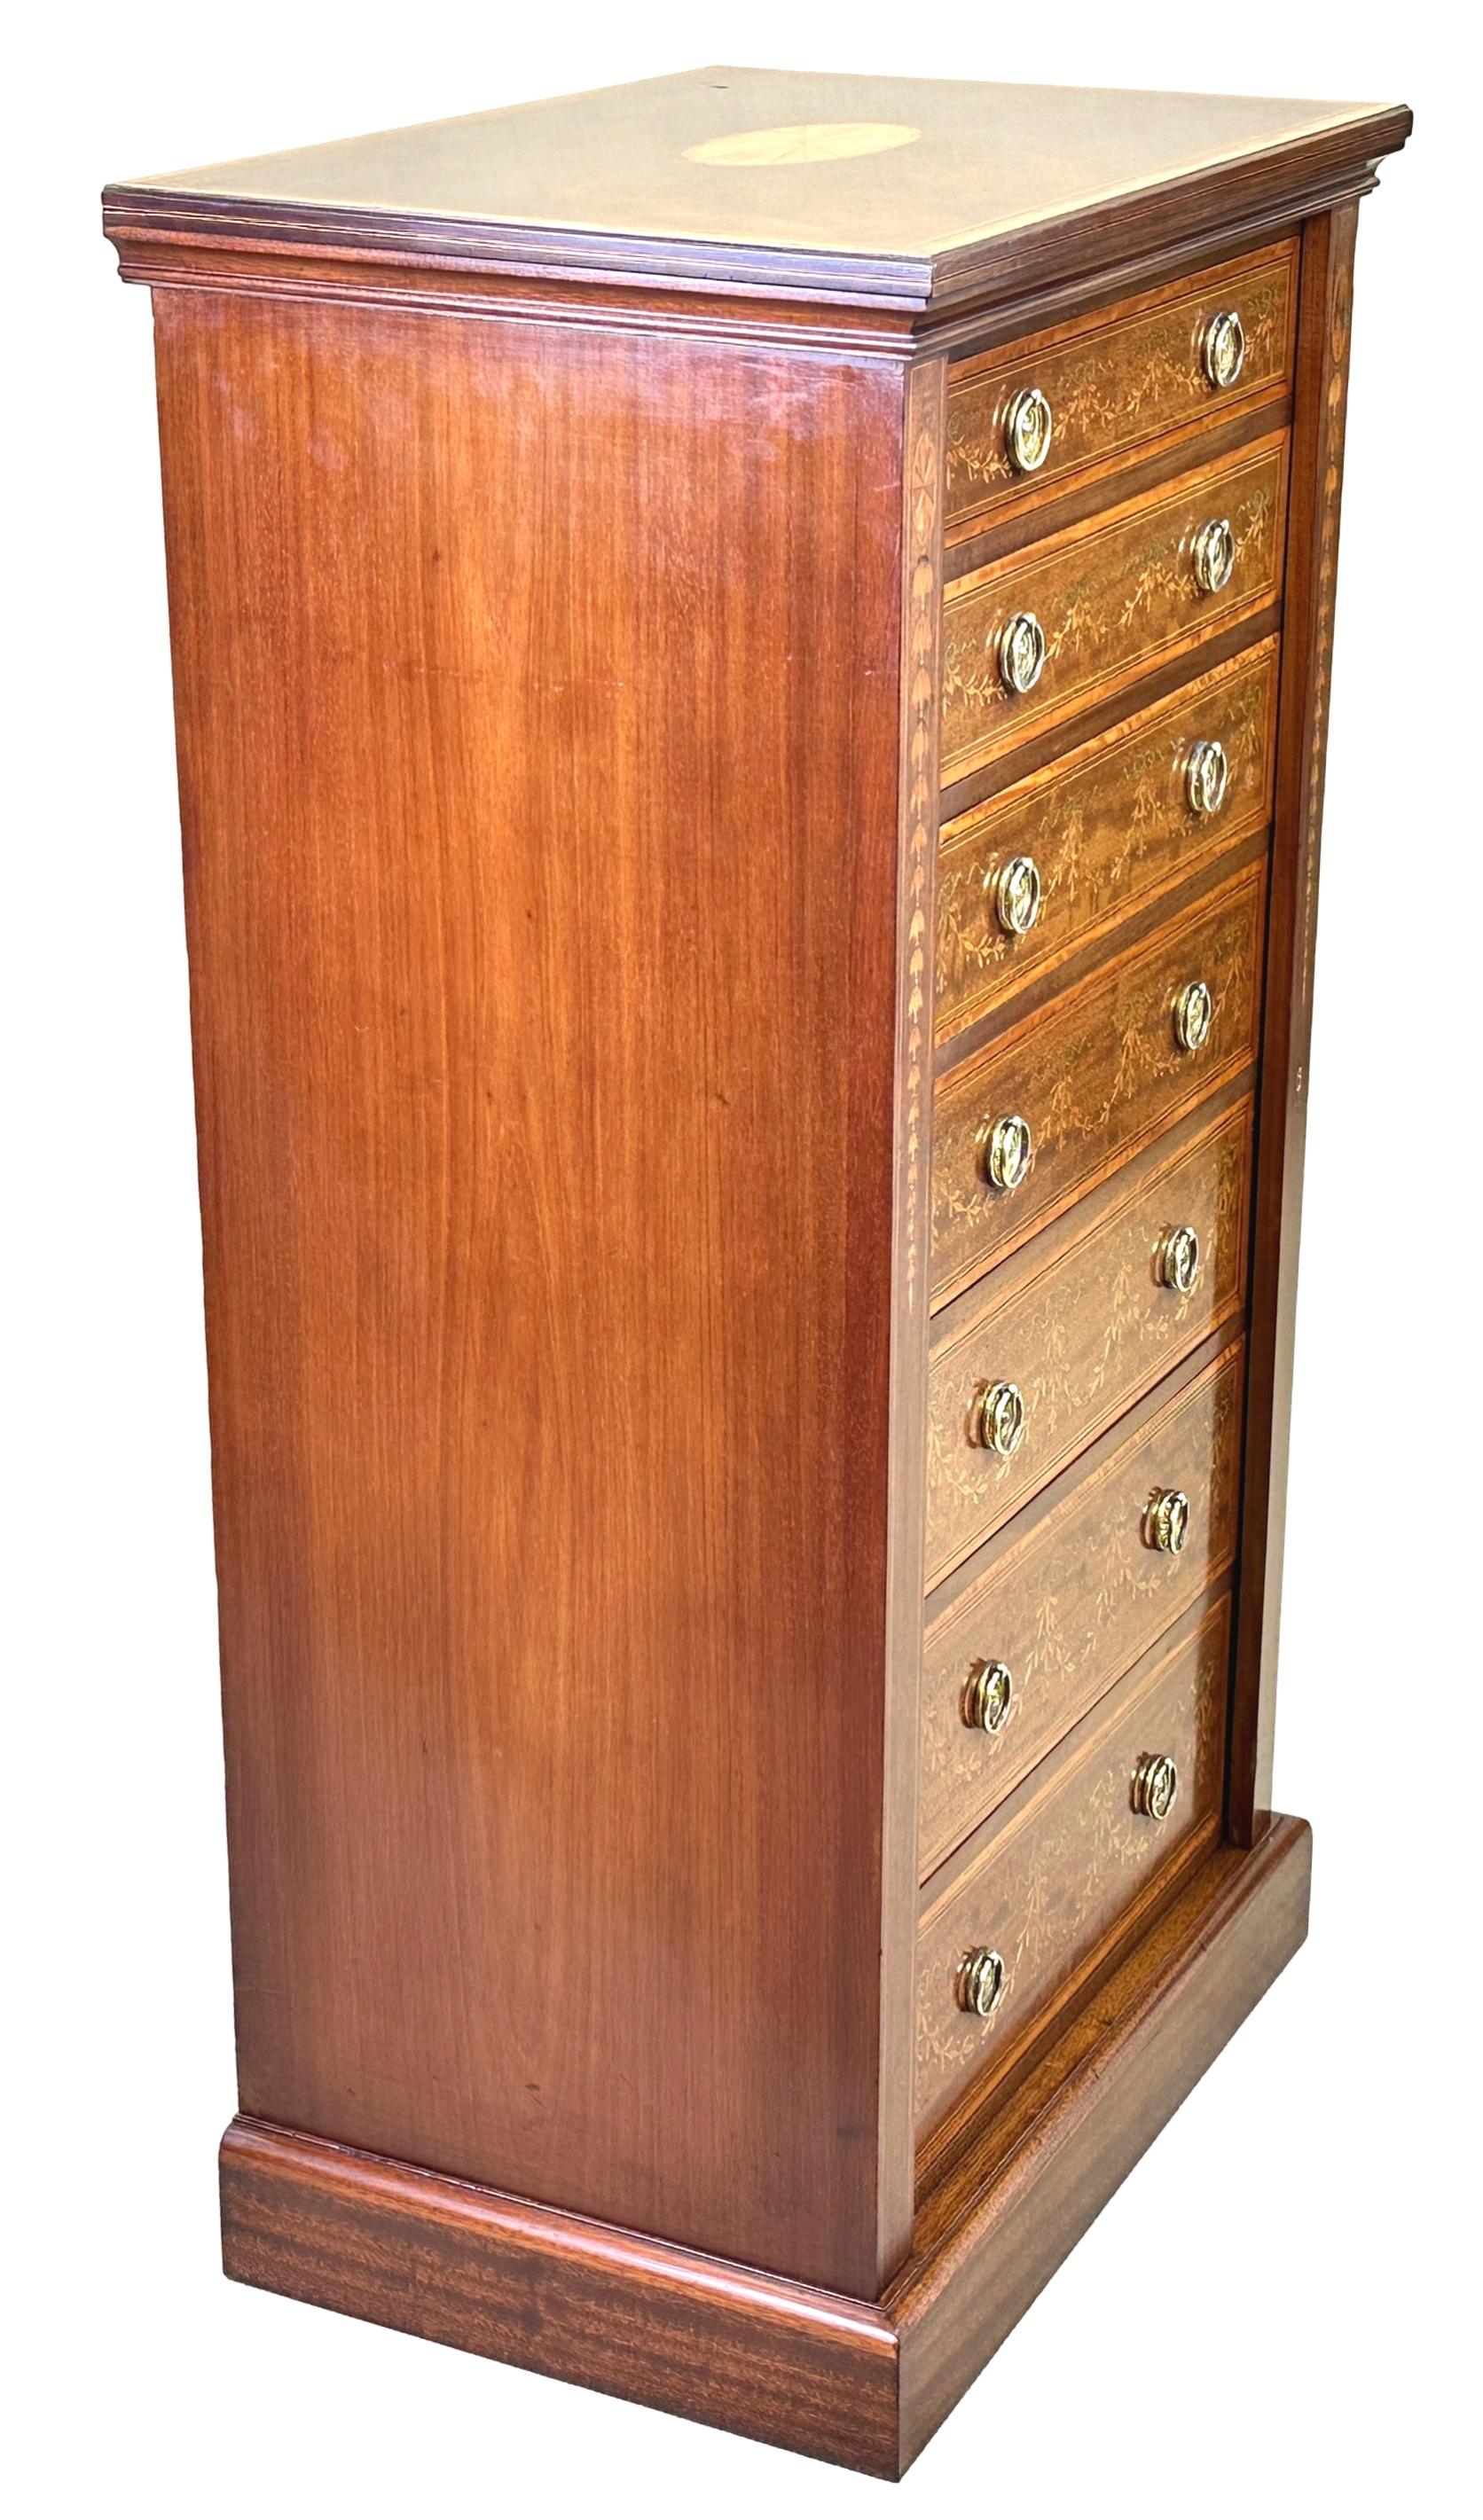 An Exceptional Quality Late 19th Century Mahogany And Satinwood Wellington Chest Of Drawers, Having Superbly Figured Rectangular Top With Inlaid And Crossbanded Decoration, Over Seven Mahogany Lined Drawers With Profuse Inlaid Decoration And